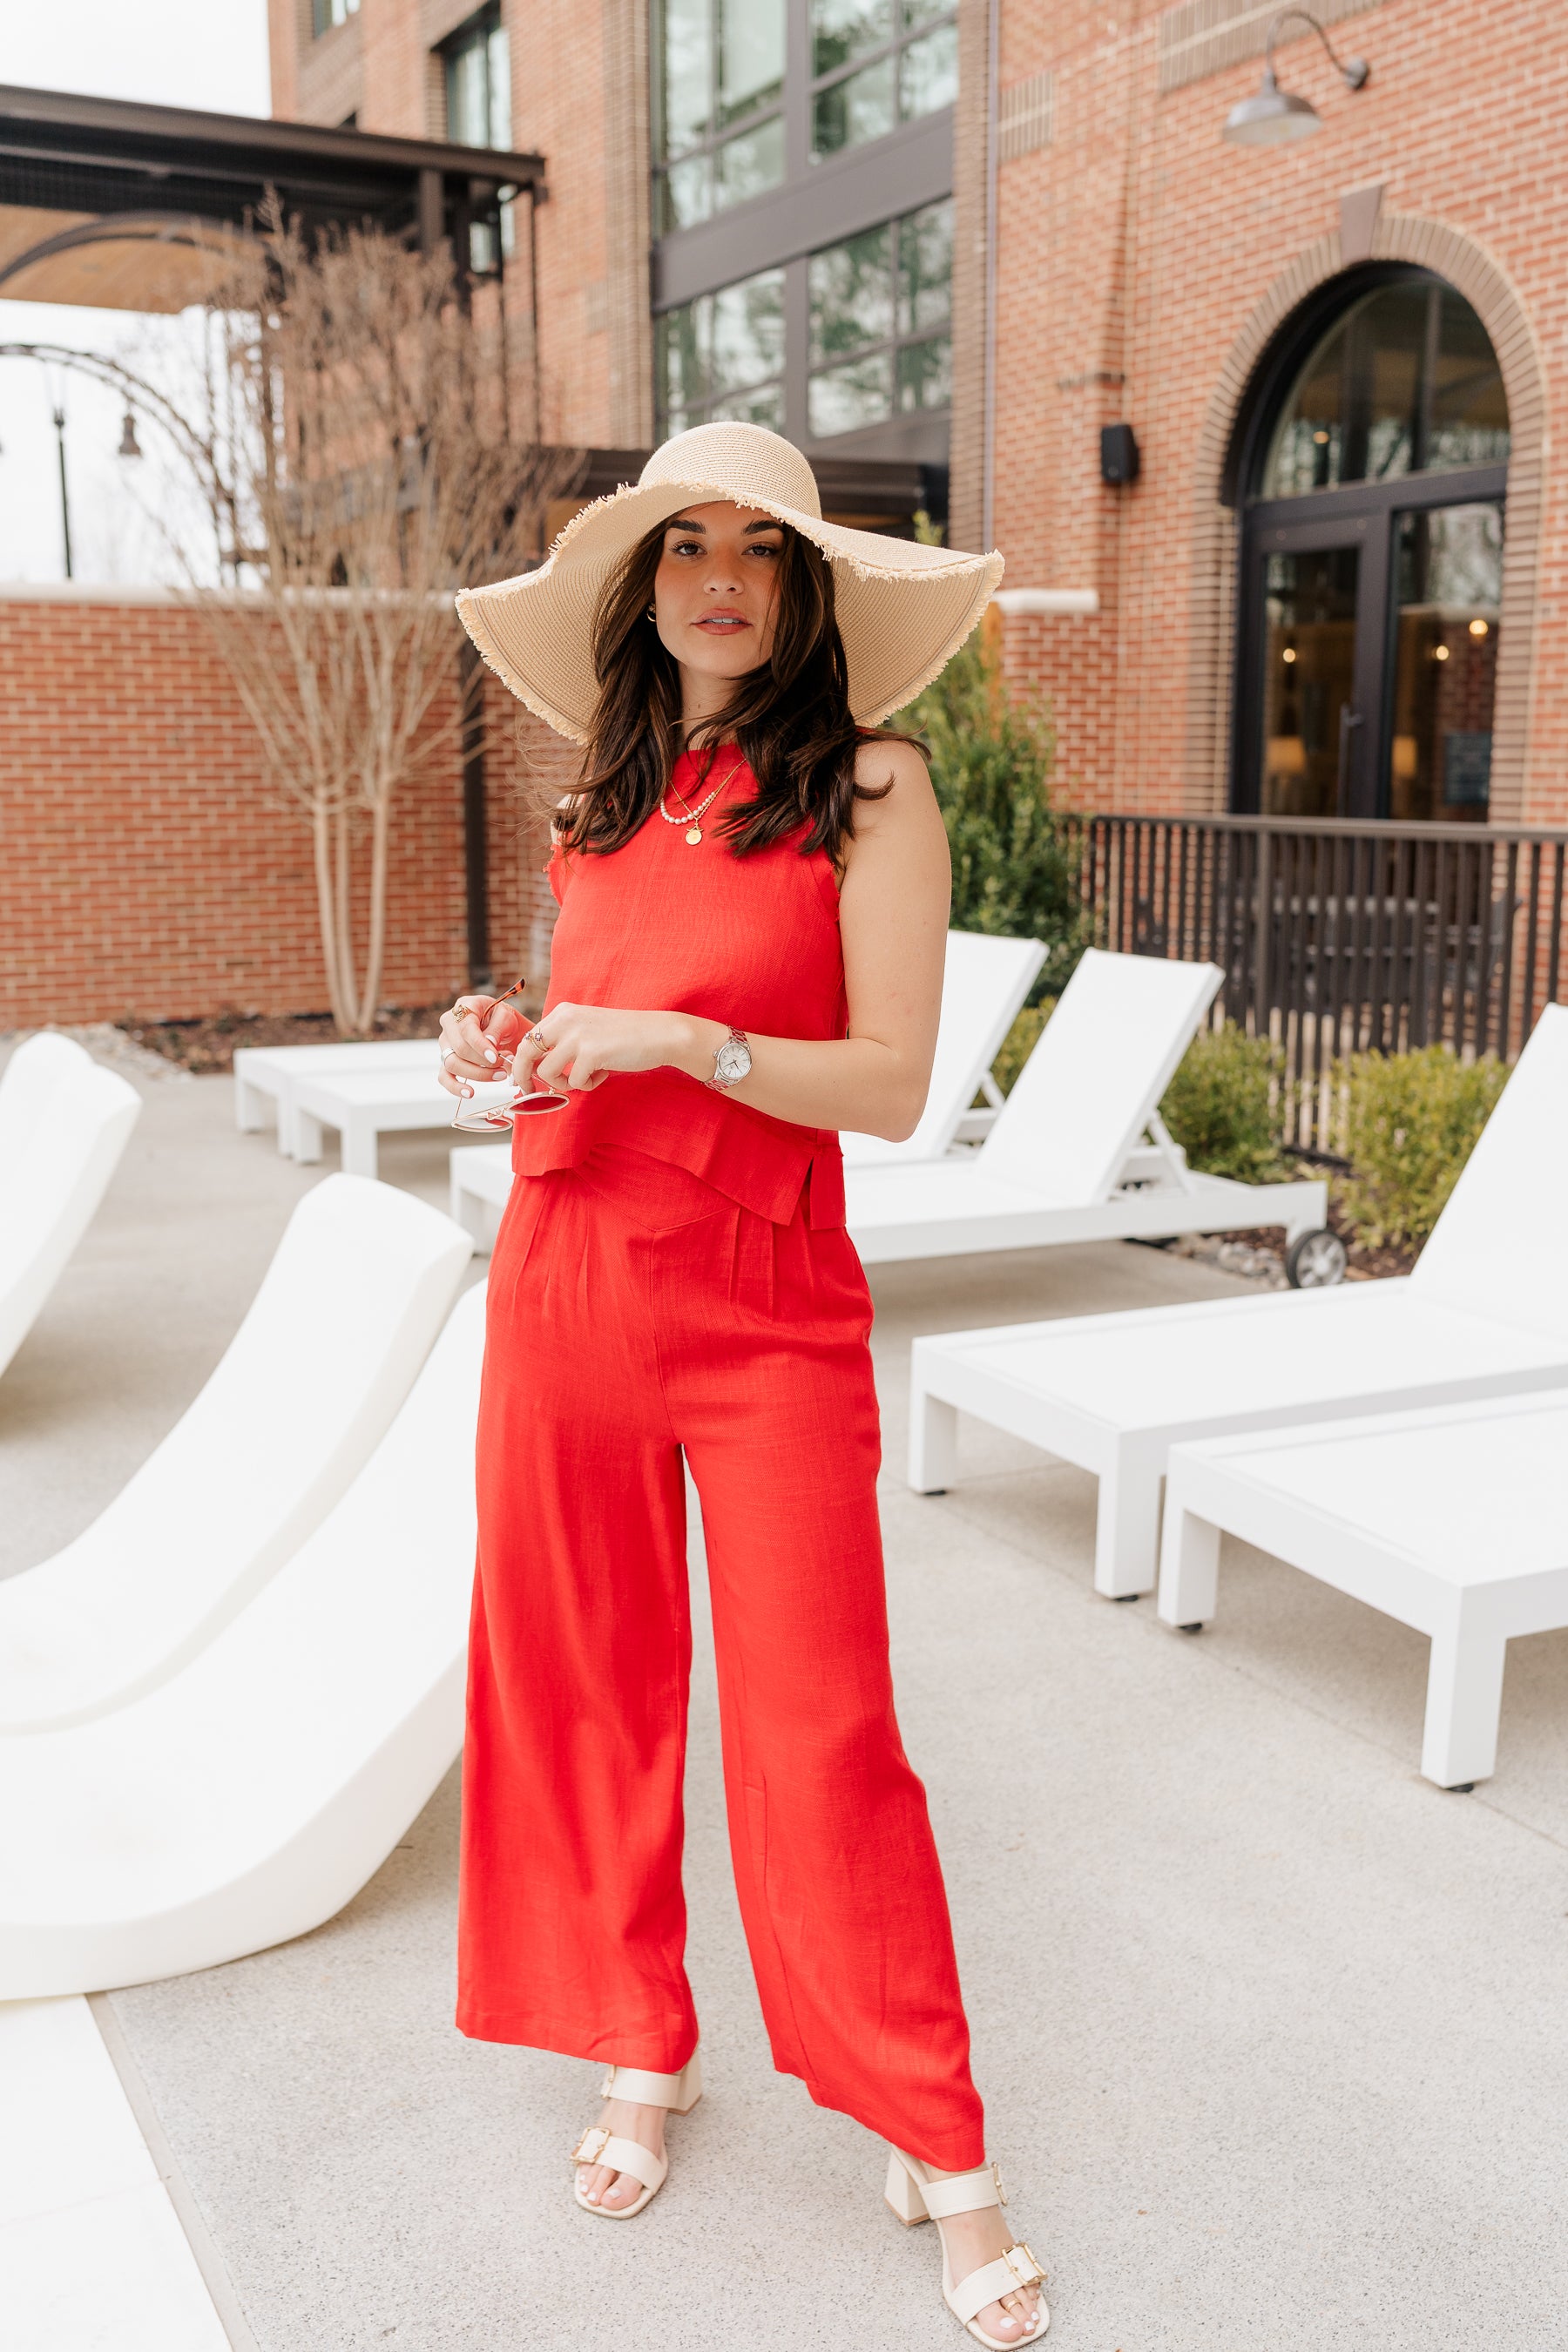 Full body front view of model wearing the Vada Red Wide Leg Pants that feature red woven fabric, side pockets, an elastic waistband, and flowy wide legs.